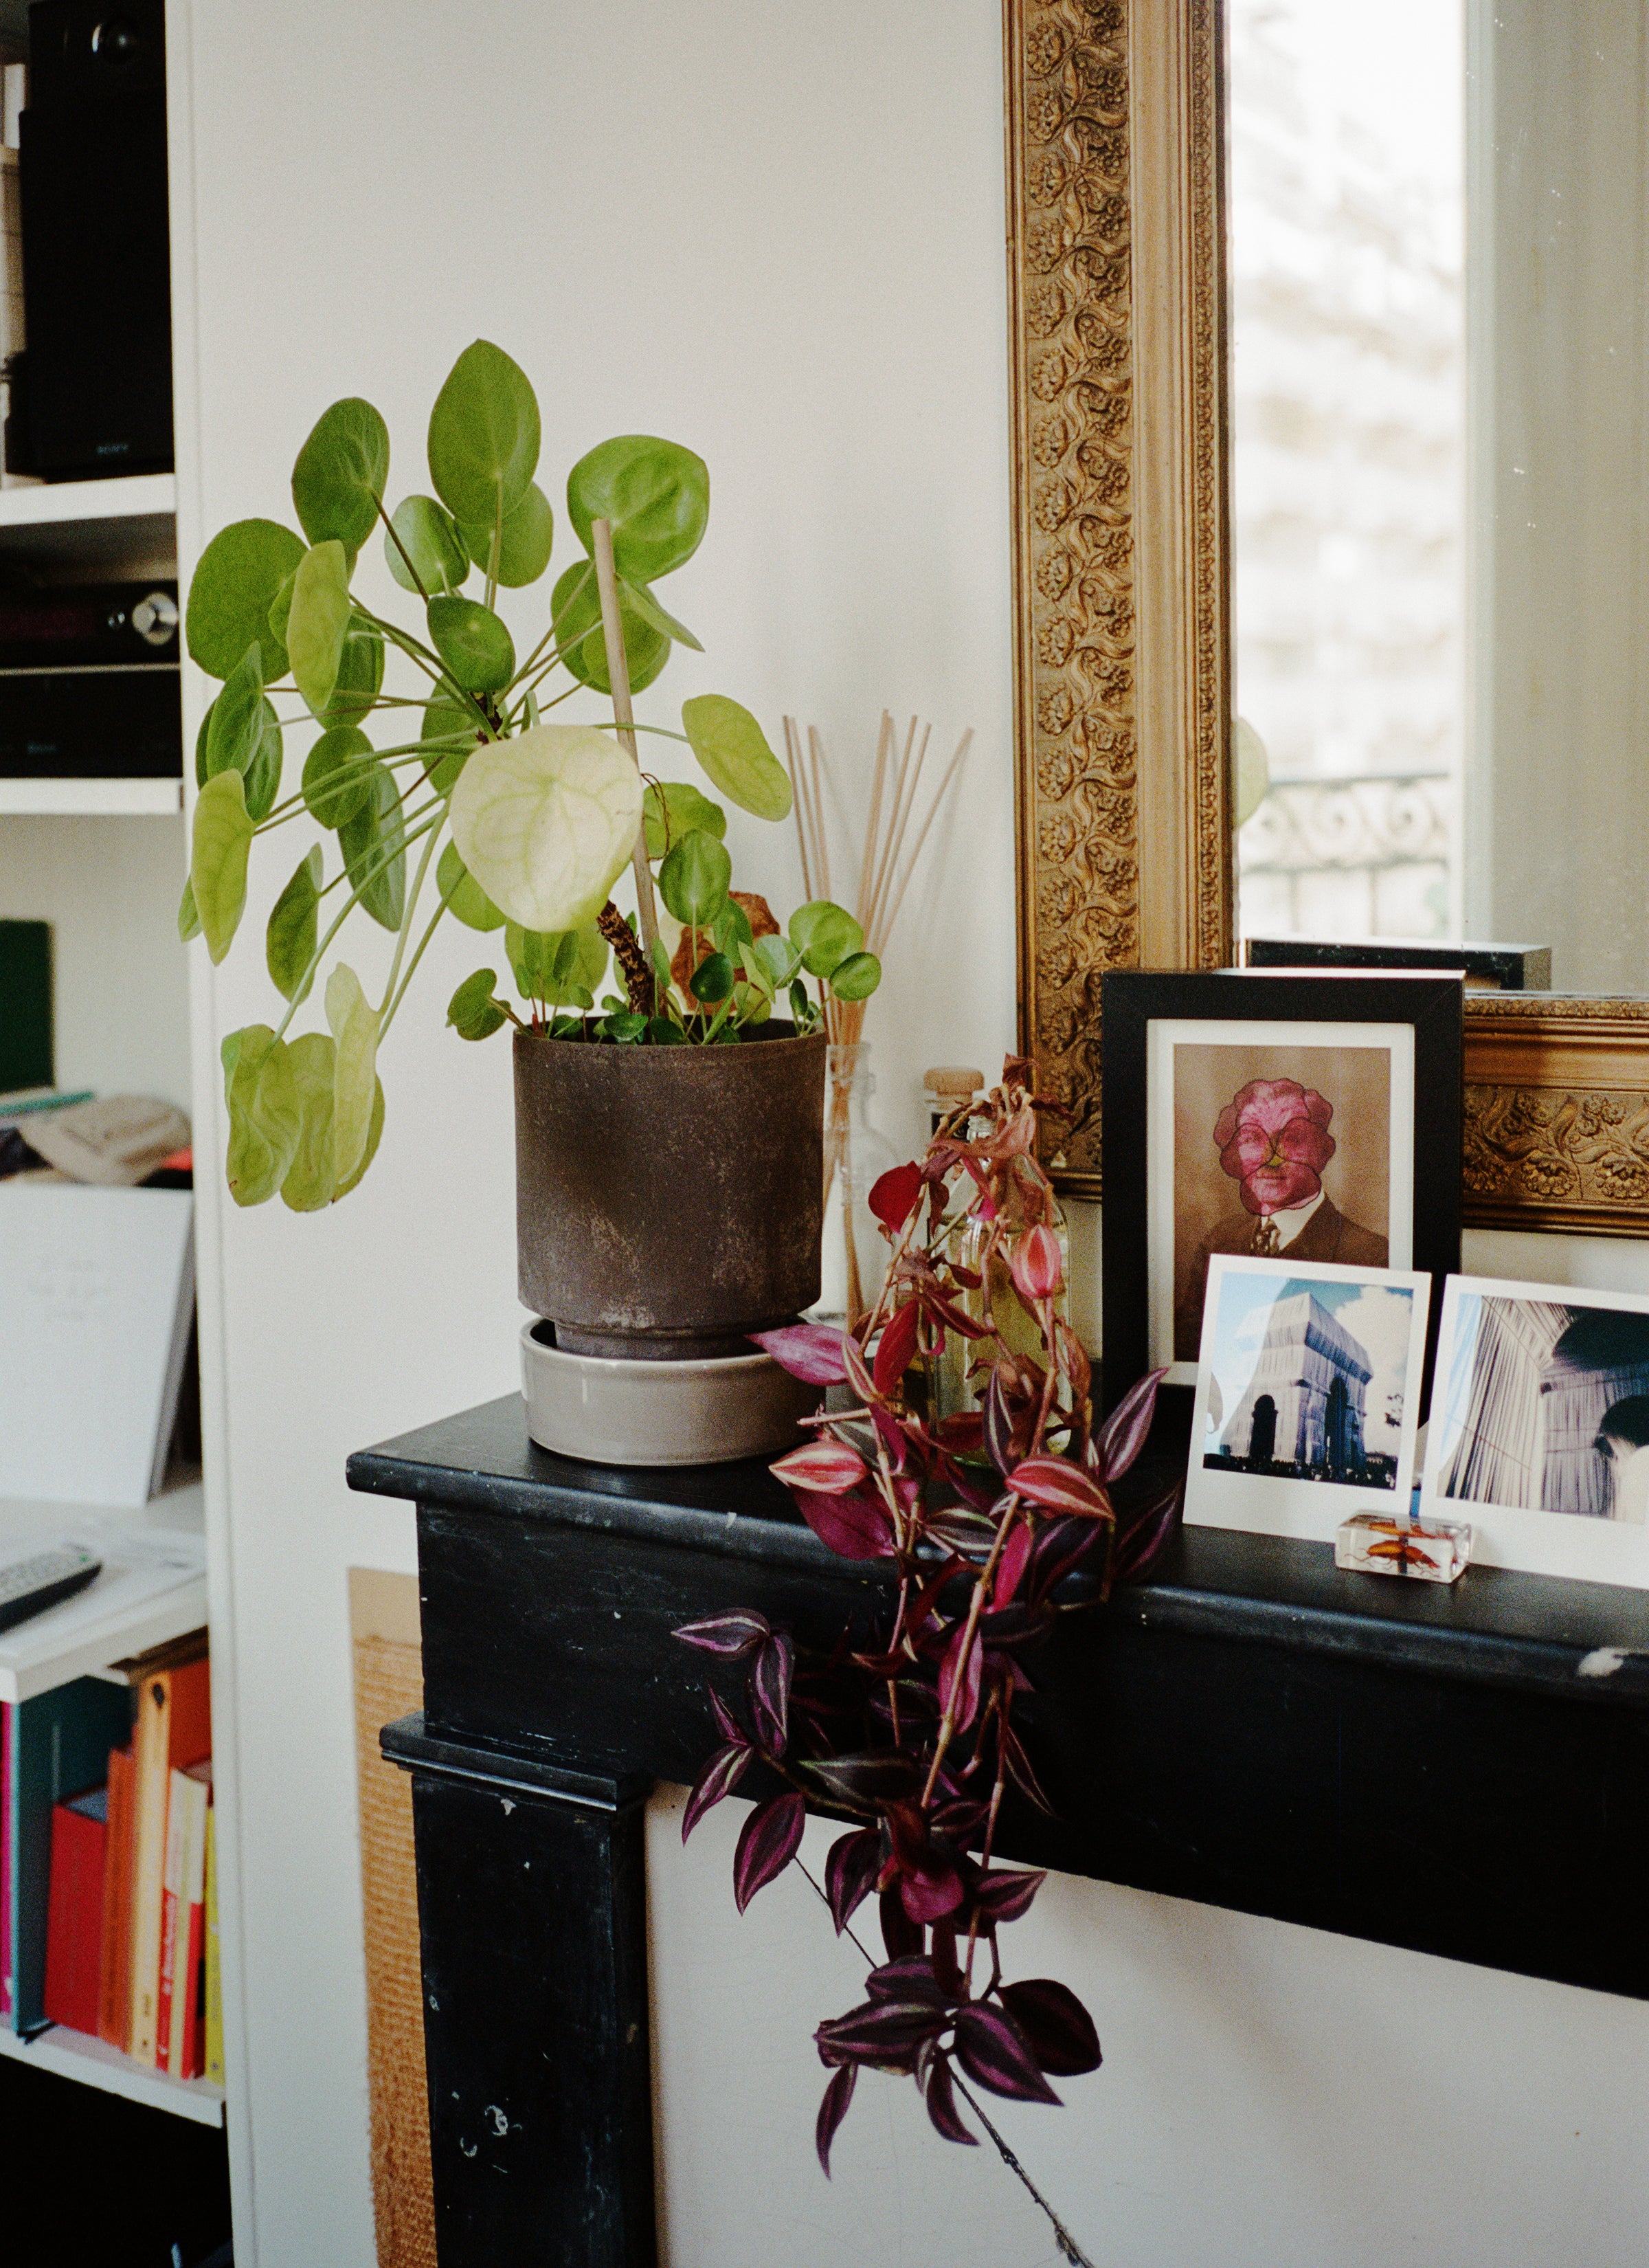 A pot of Chinese money plants and Tradescantia purple passion grows from glassware on the fireplace frame next to a collection of Polaroid pictures with a mirror behind all.